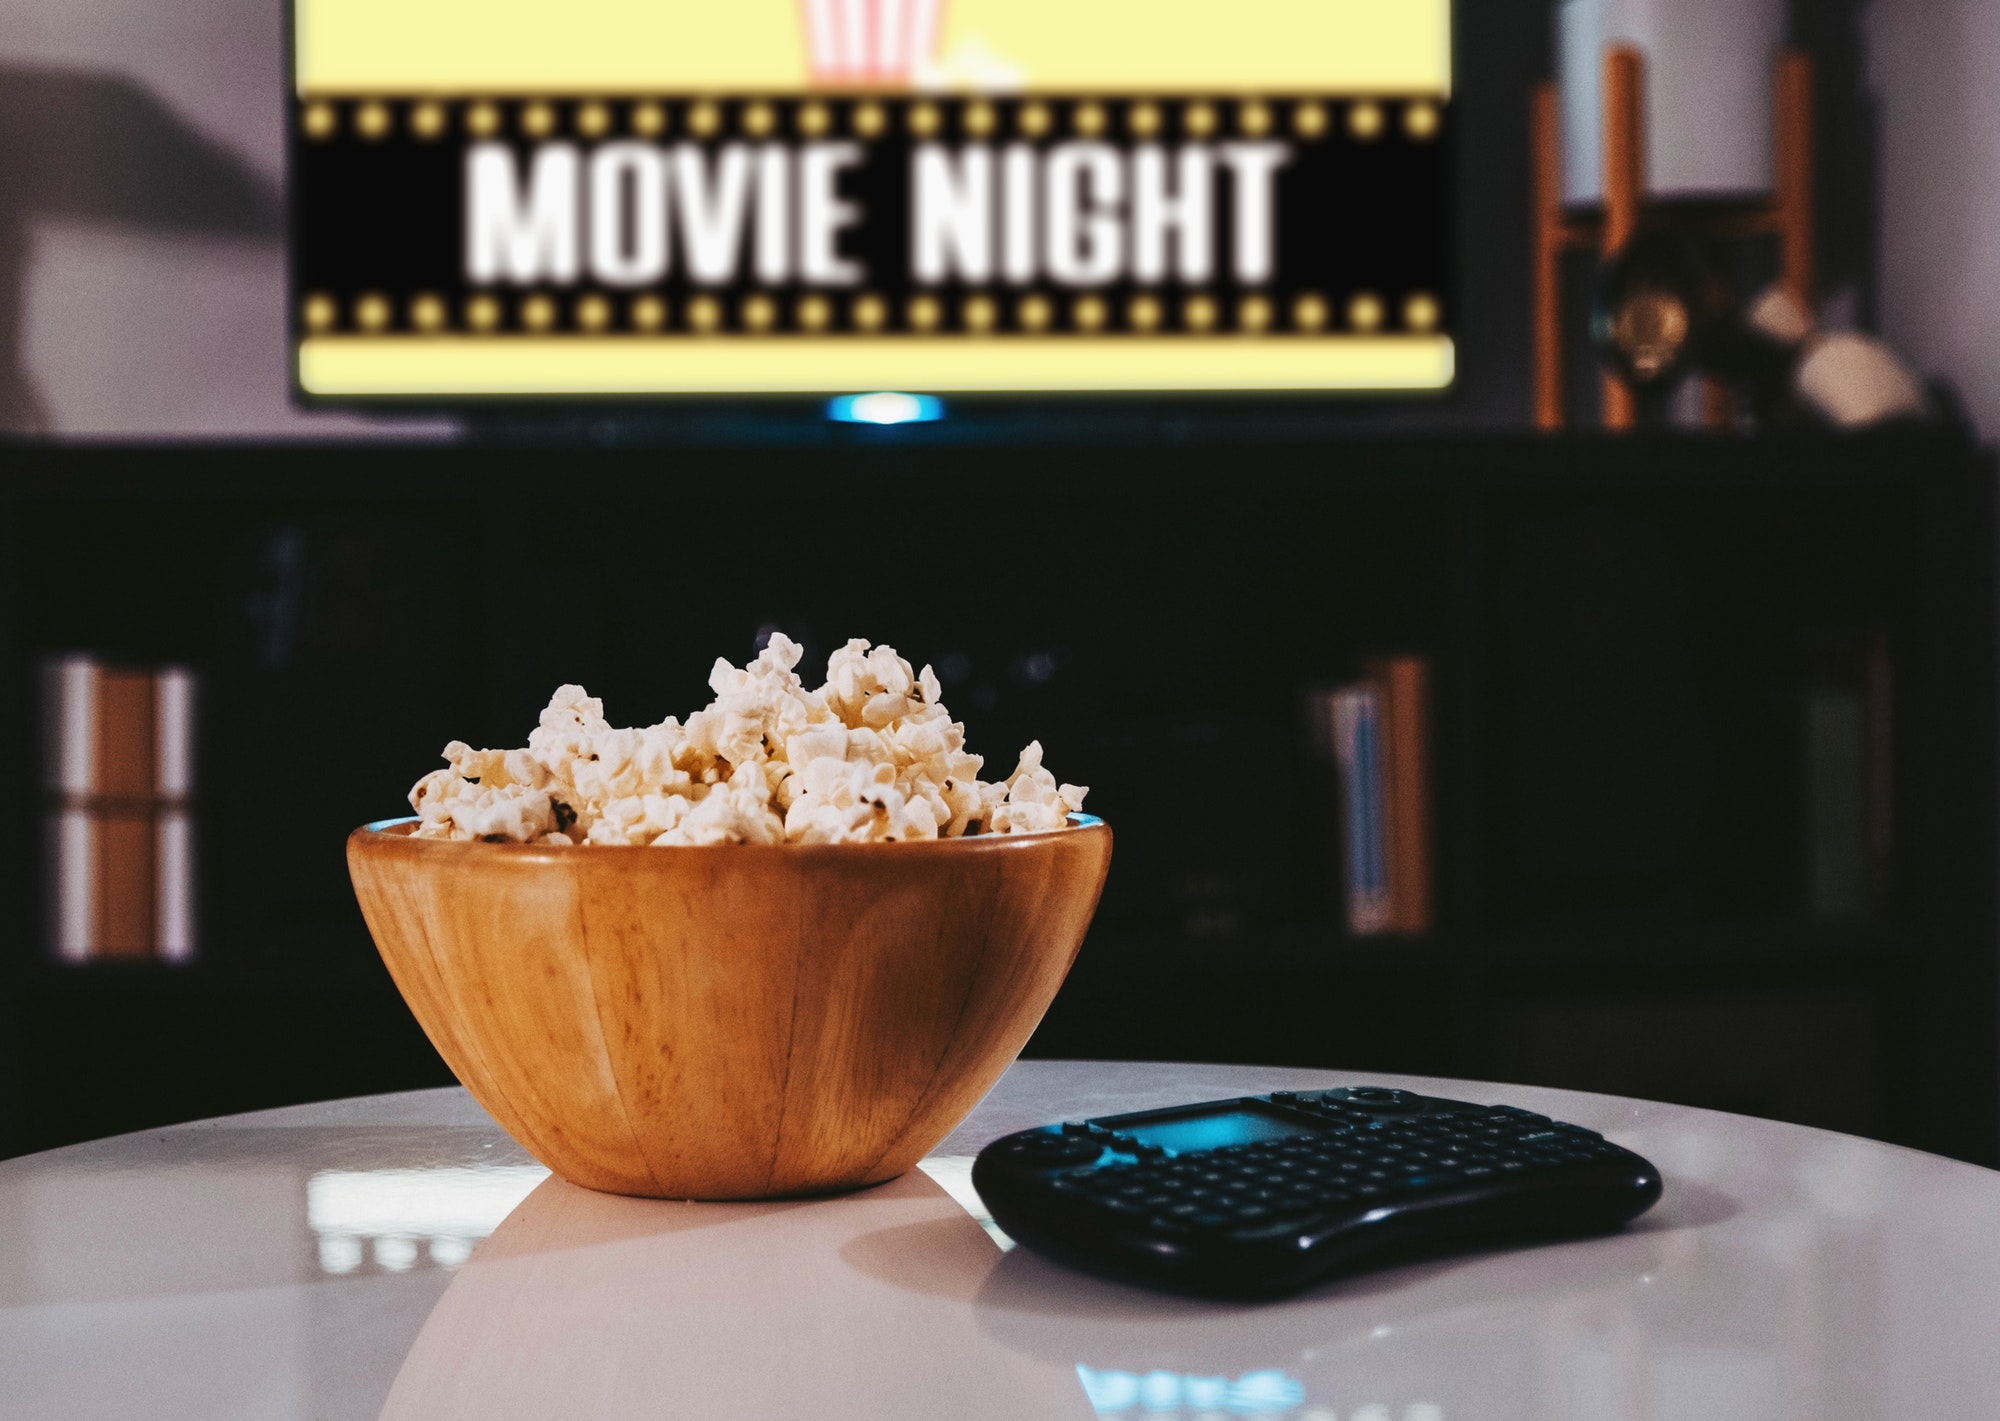 Bowl of popcorn, tv in background, movie night, home, lifestyle, remote, watching tv.